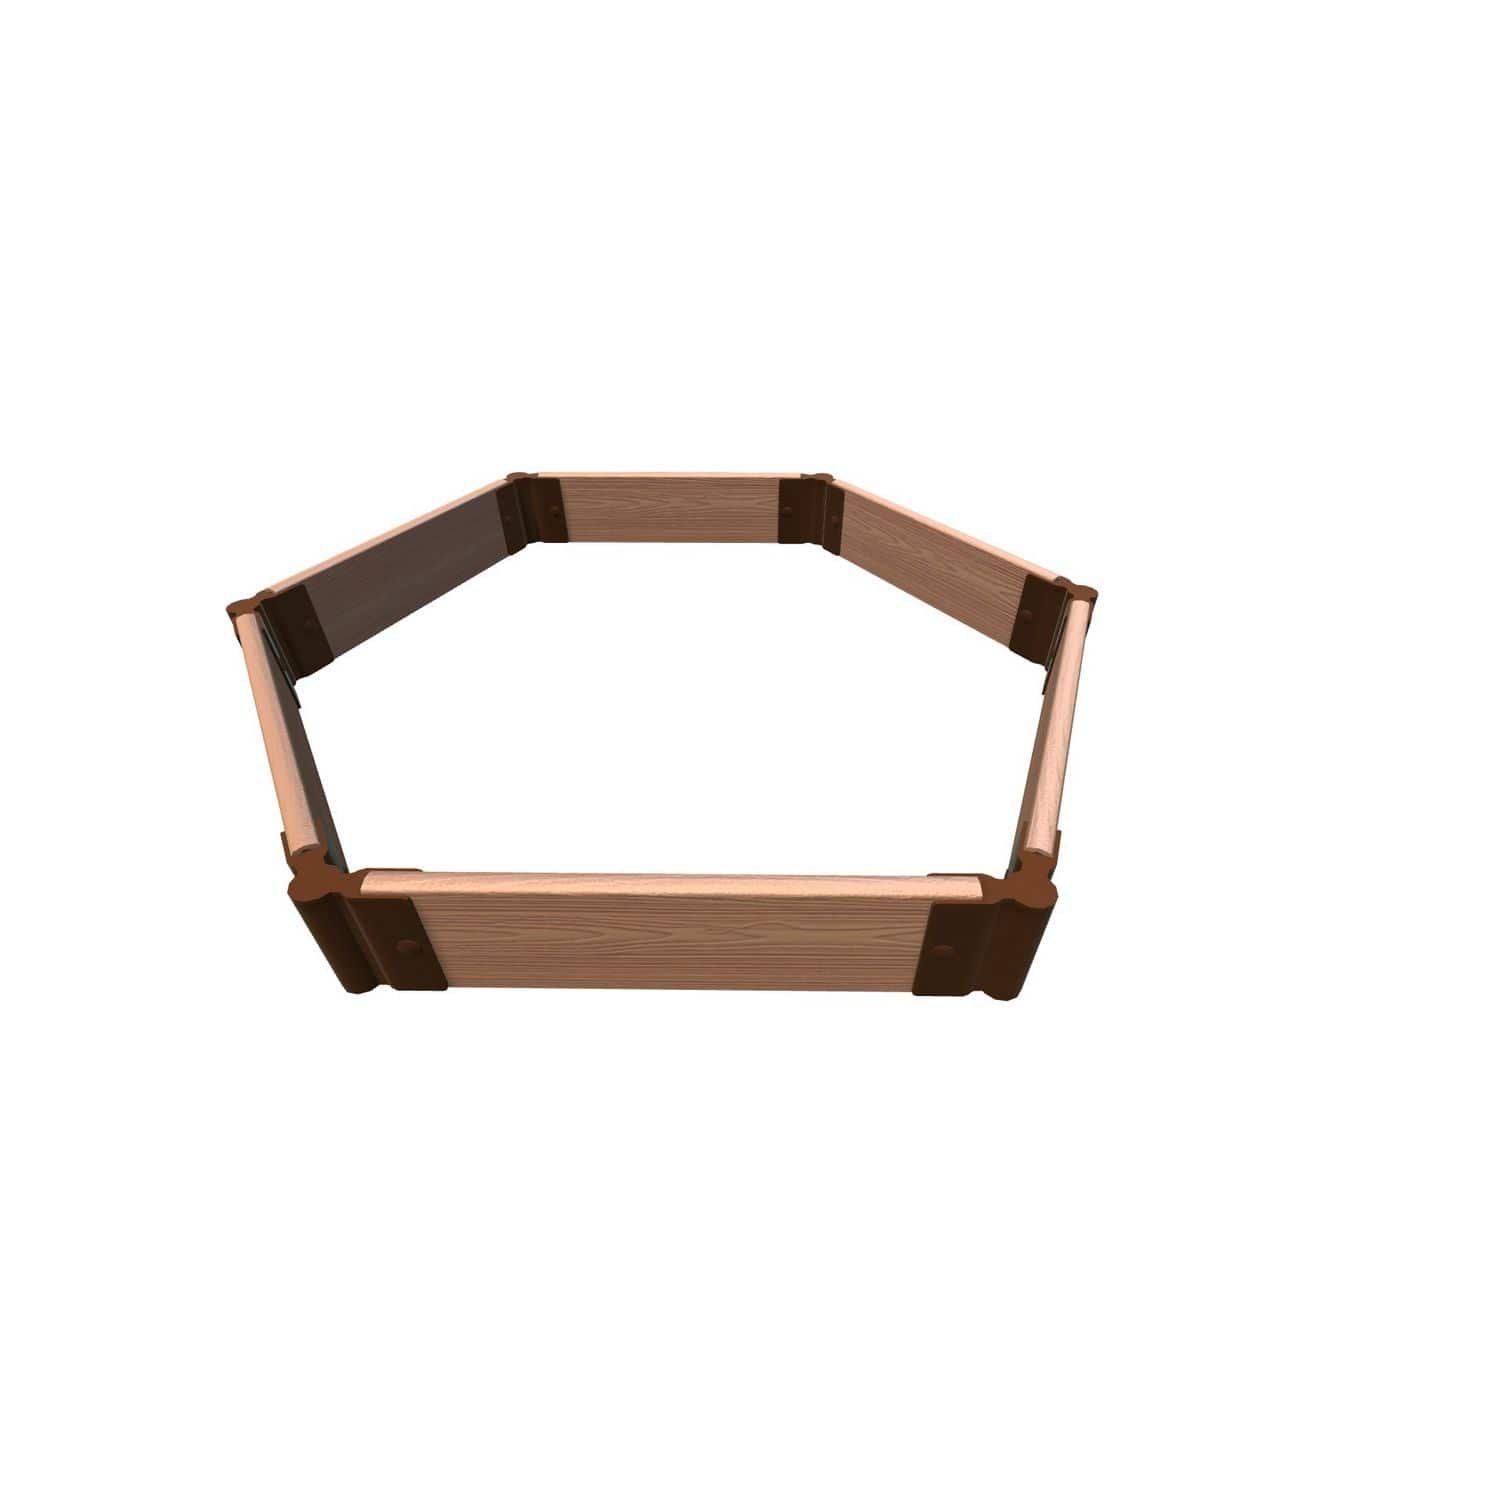 Frame It All Gardening Accessories 1" Frame It All | Tool-Free Fort Jefferson Raised Garden Bed (Hexagon) 4' X 4' X 5.5" - Classic Sienna 200001467